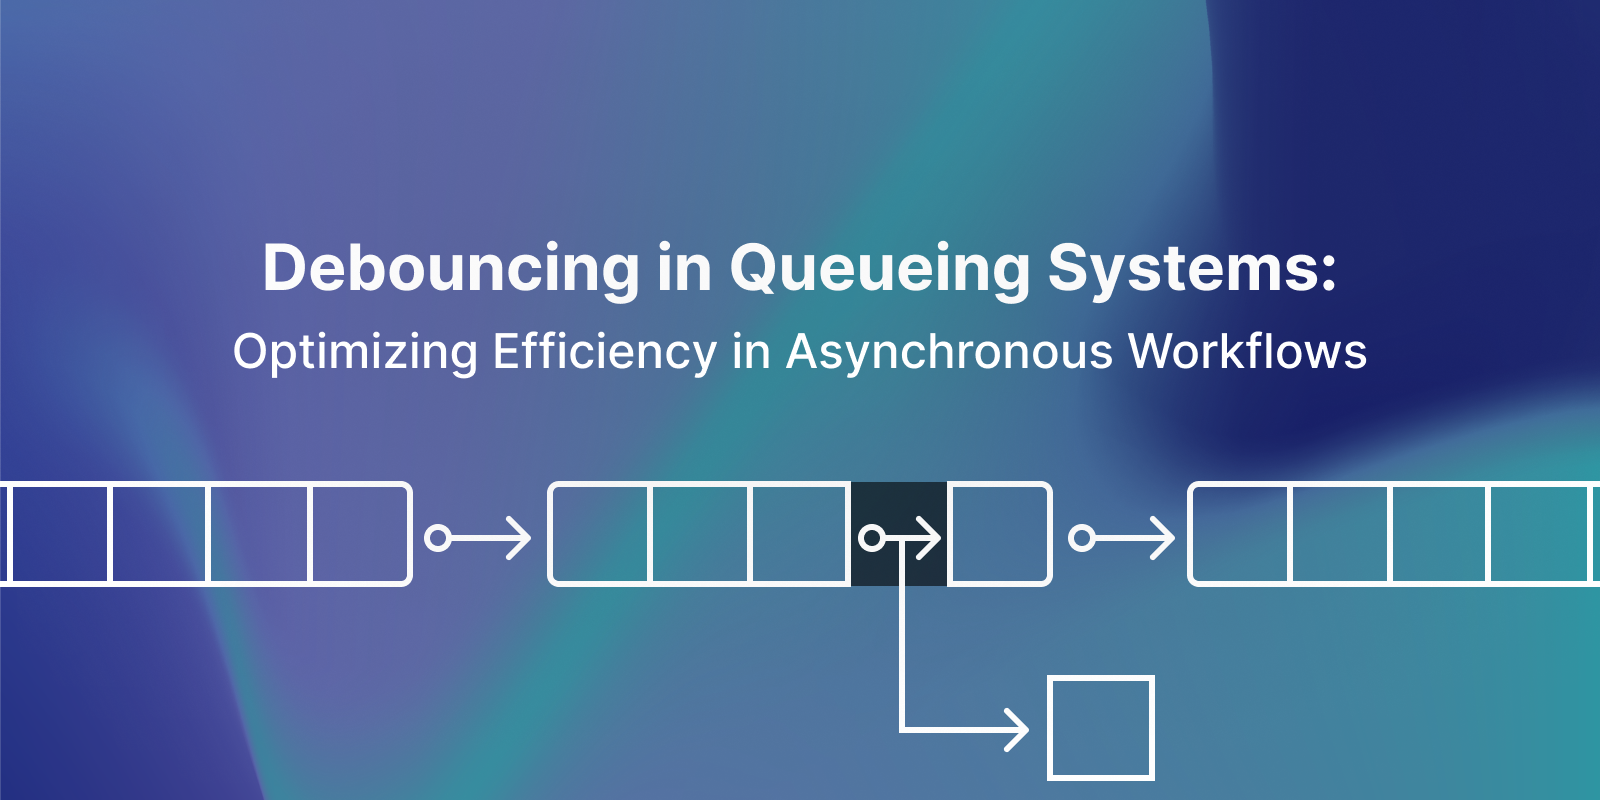 Featured image for Debouncing in Queueing Systems: Optimizing Efficiency in Asynchronous Workflows blog post